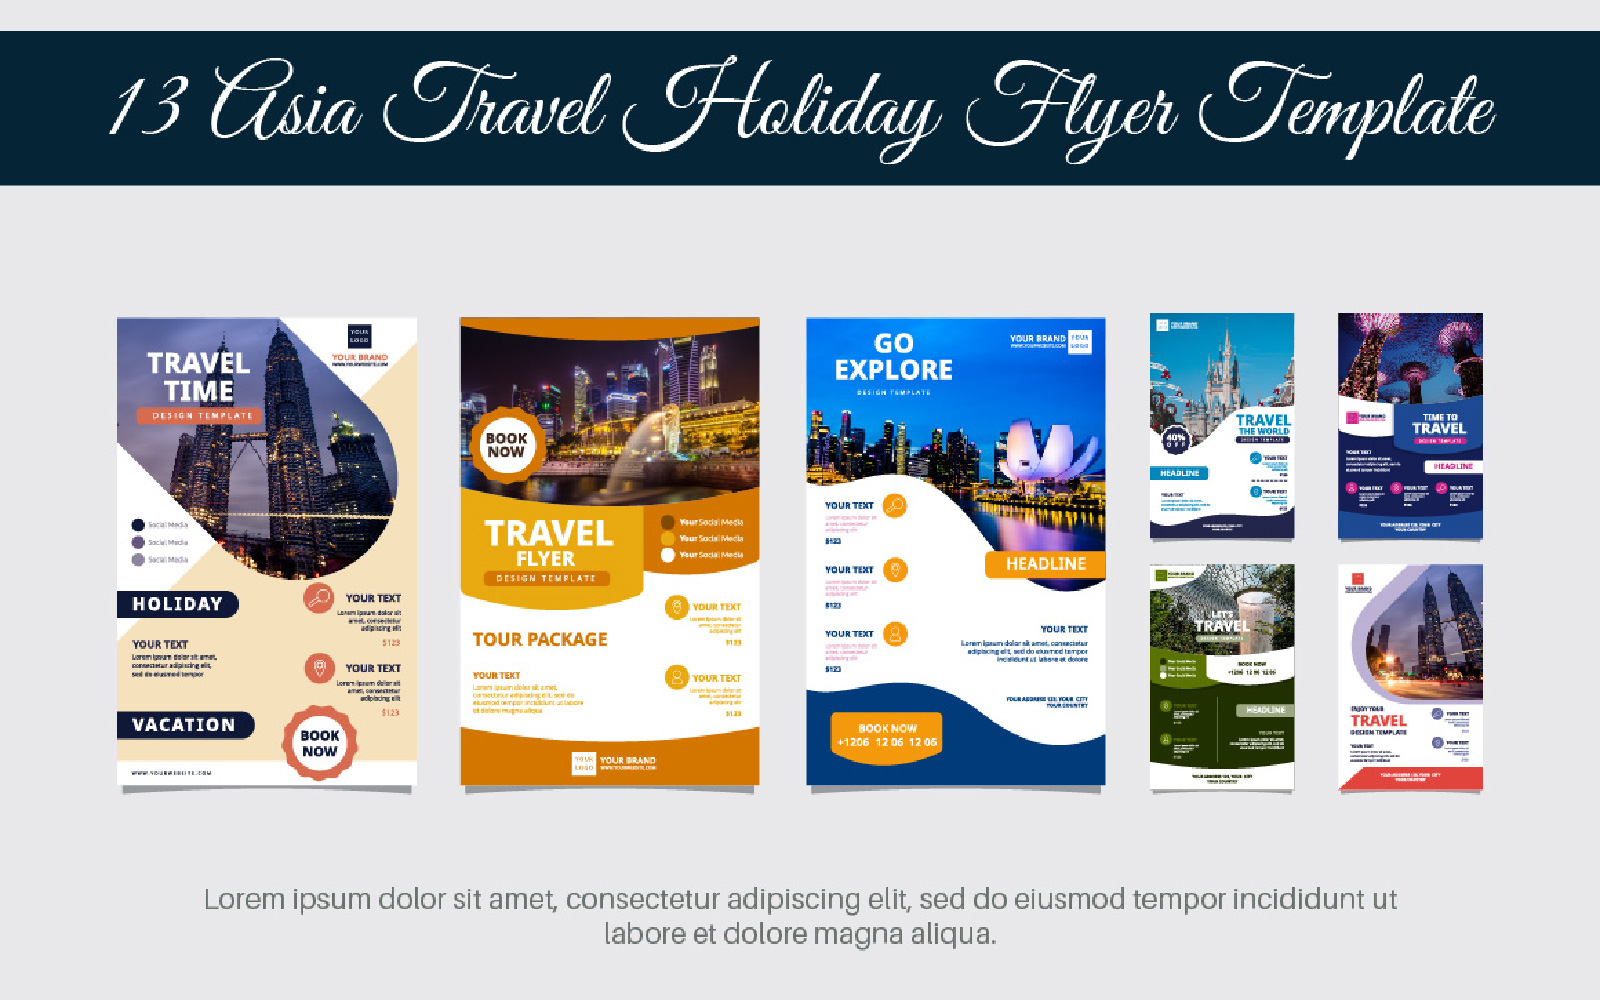 13 Asia Travel Holiday Flyer Template